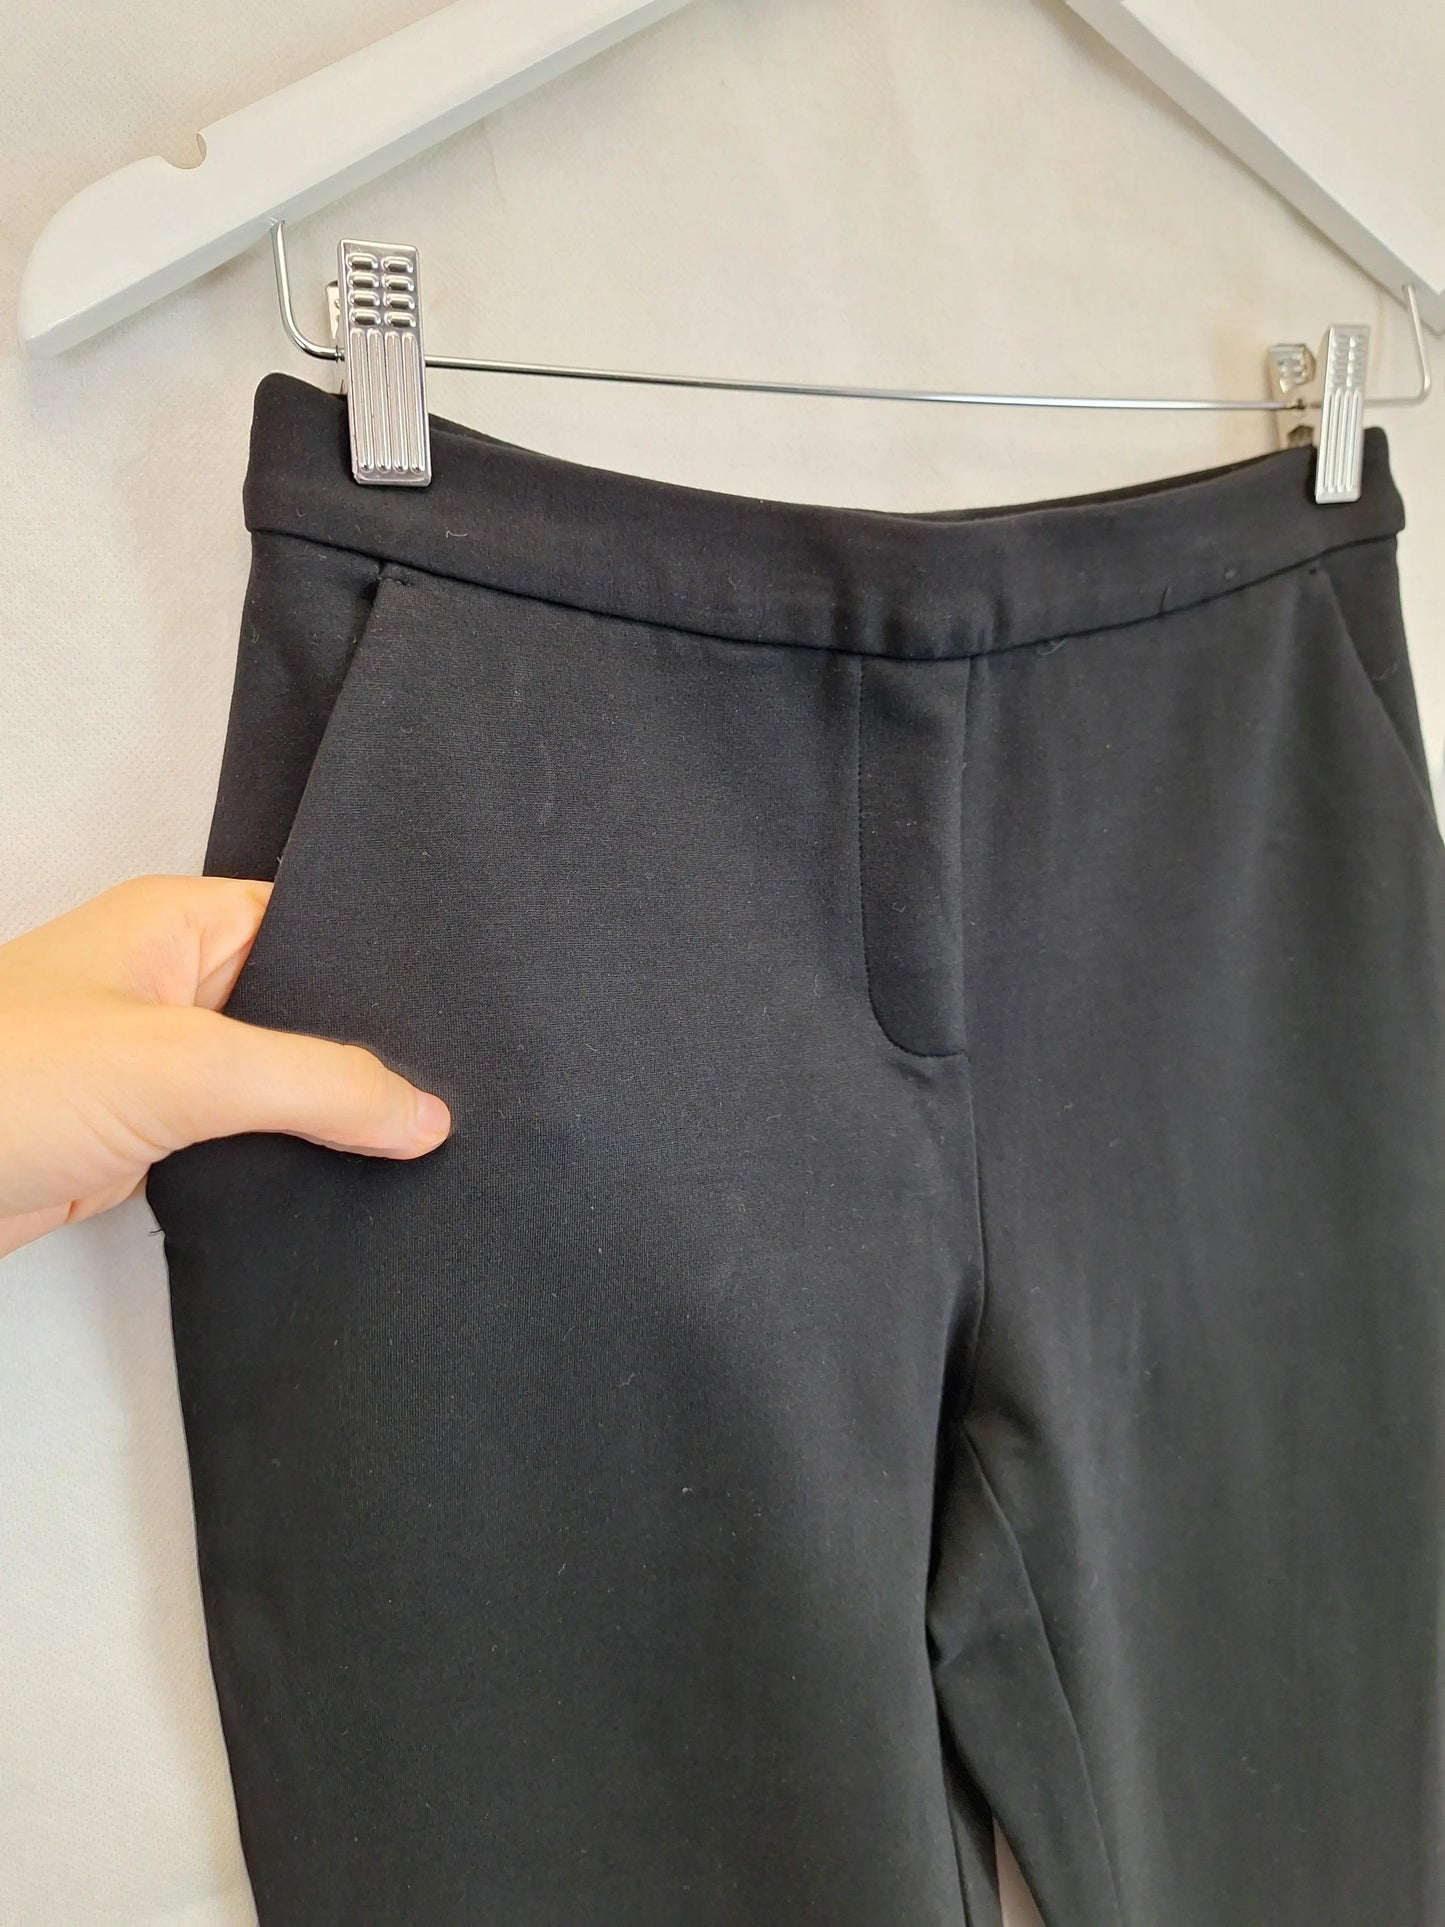 Jacqui. E Essential Stretch Smart Pants Size 6 by SwapUp-Online Second Hand Store-Online Thrift Store